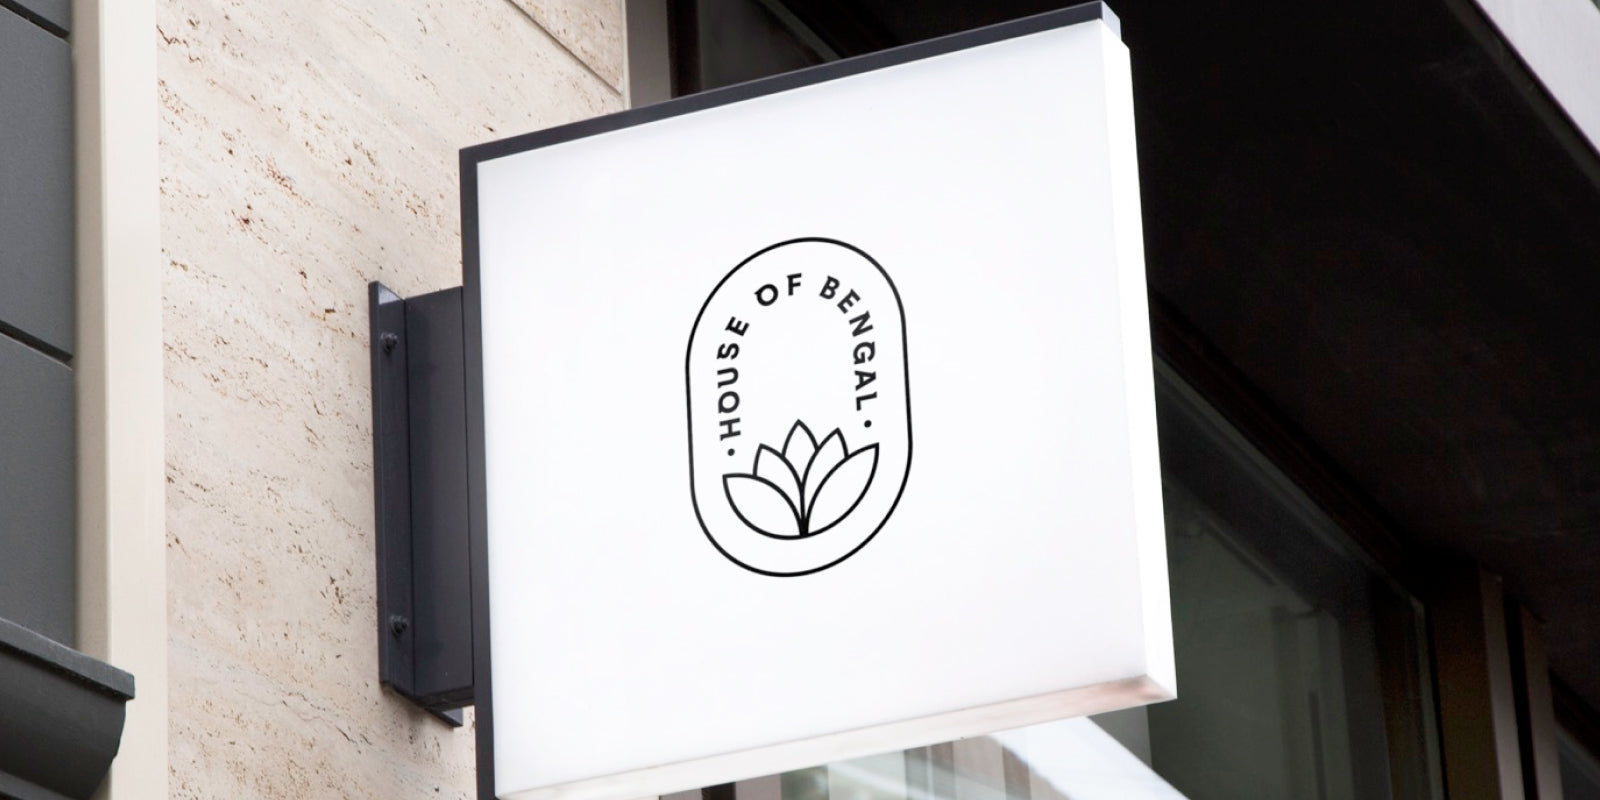 Storefront signage for House of Bengal, logo on a white sign board